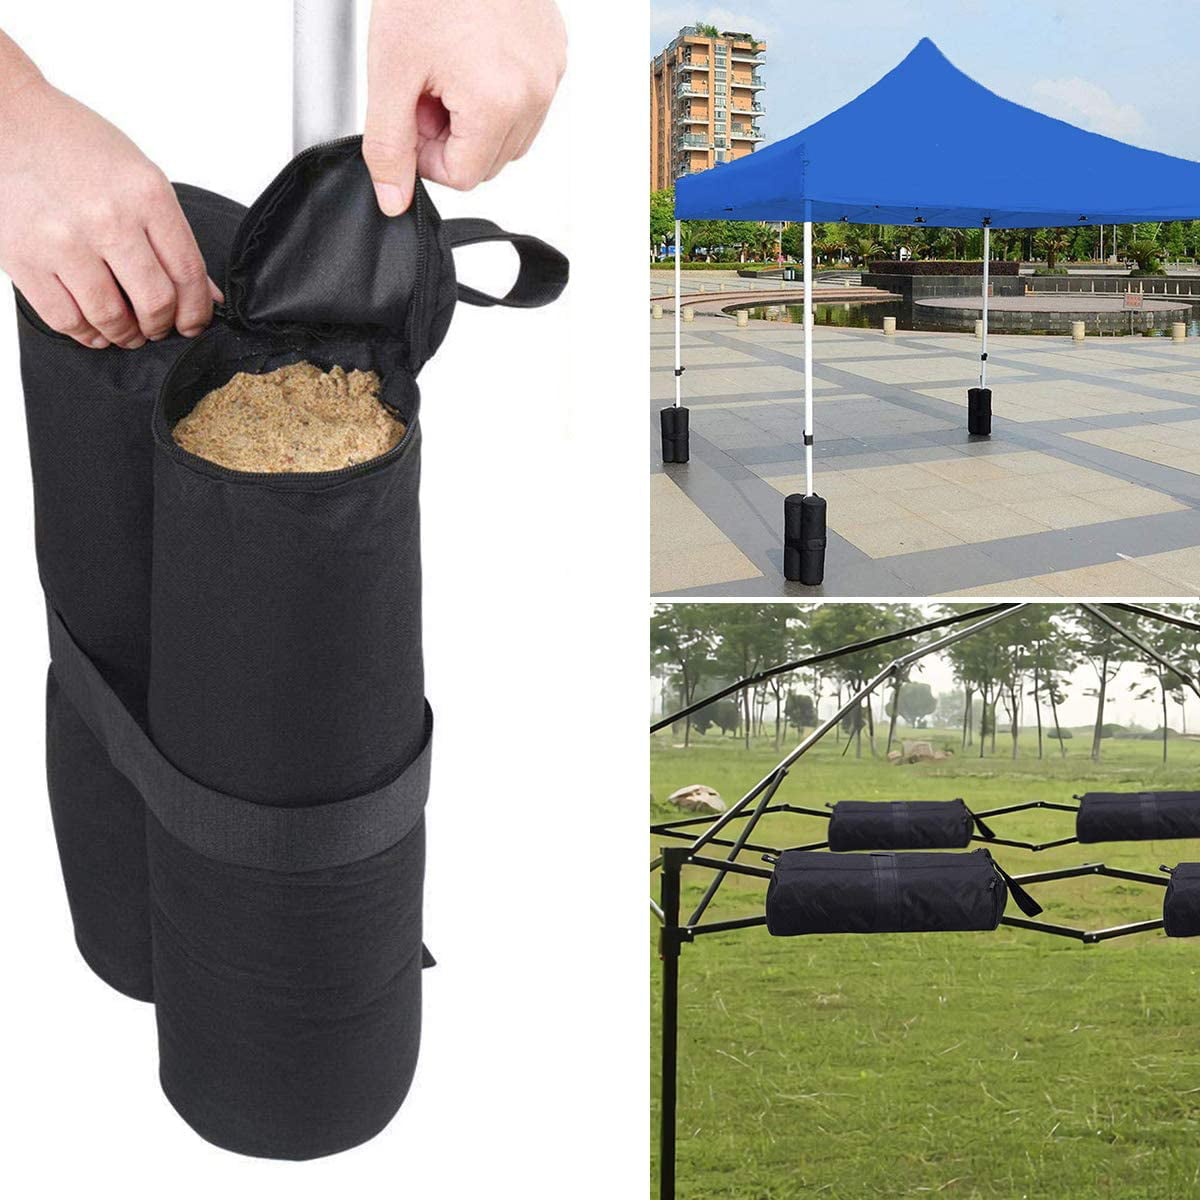 4 PK GARDEN GAZEBO FOOT LEG POLE ANCHOR WEIGHTS MARQUEE PARTY TENT MARKET AWNING 